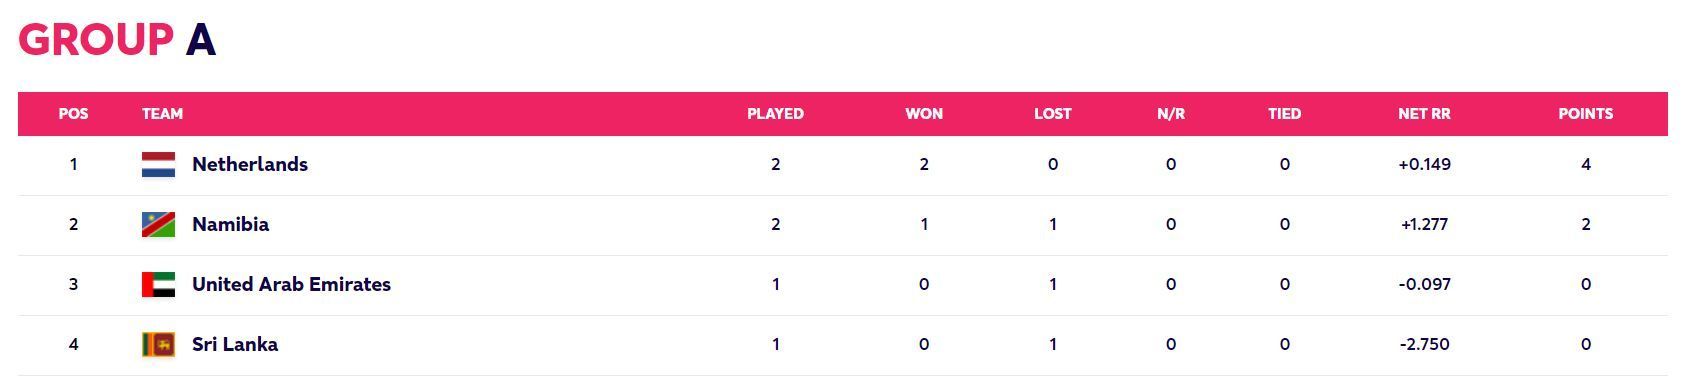 Updated Points Table after Match 5 (Image Courtesy: www.t20worldcup.com)